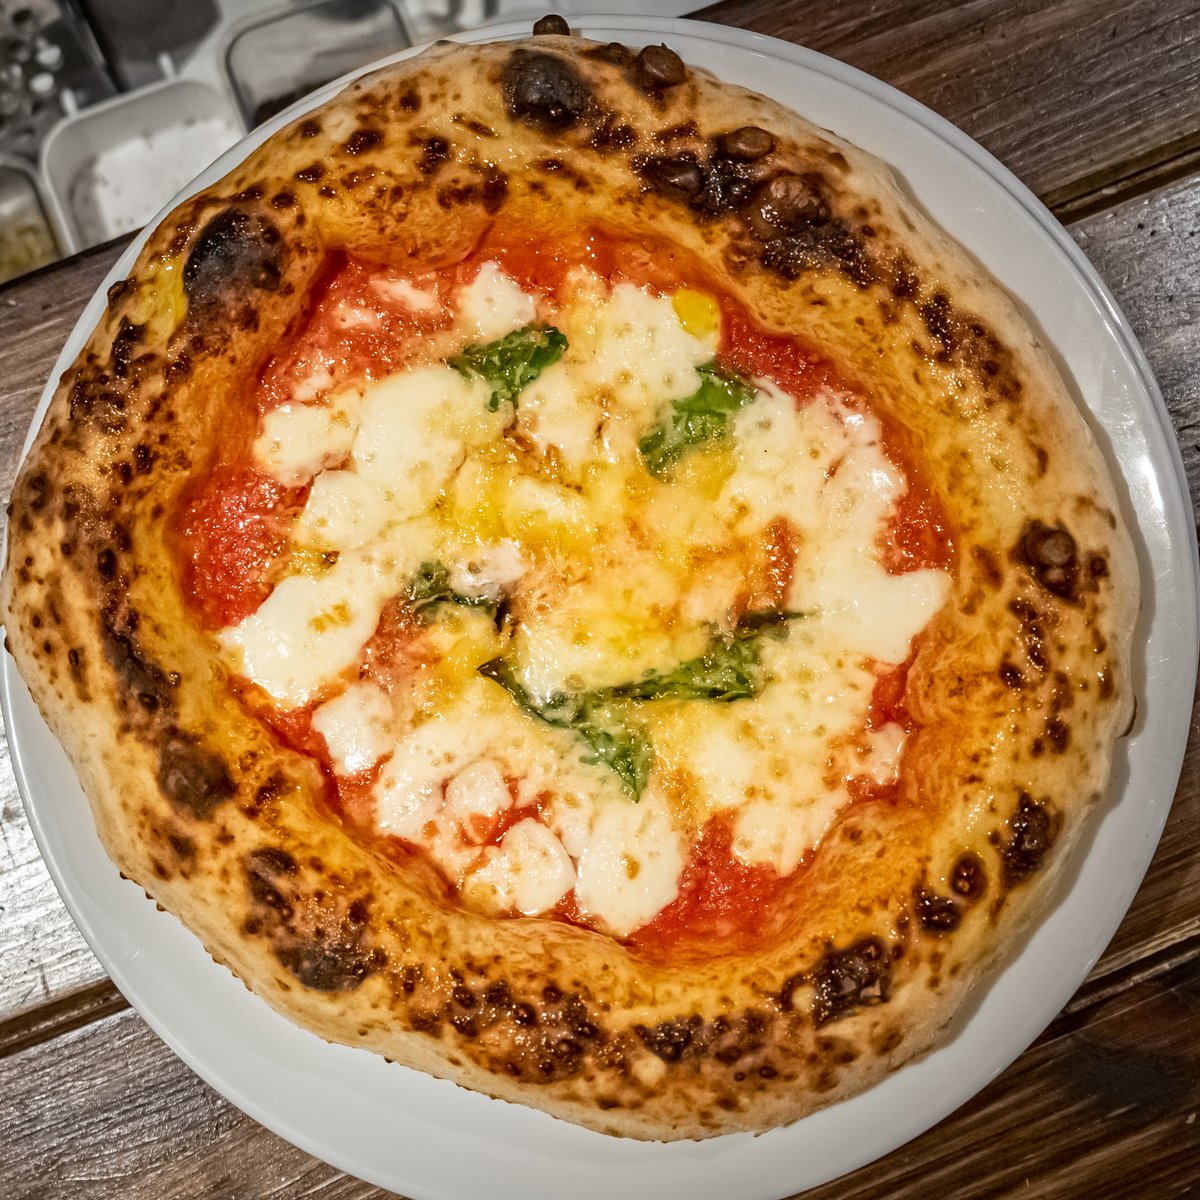 Easter weekend is approaching which we know is a busy time for all so take that stress away and book a table for your family or friends at Augusto.

…opizzeriachester.superbexperience.com

#pizzaparty #pizzalove #chesterfoodie #foodlover #foodanddrink #westchestereats #cheshirepizzeria #chester